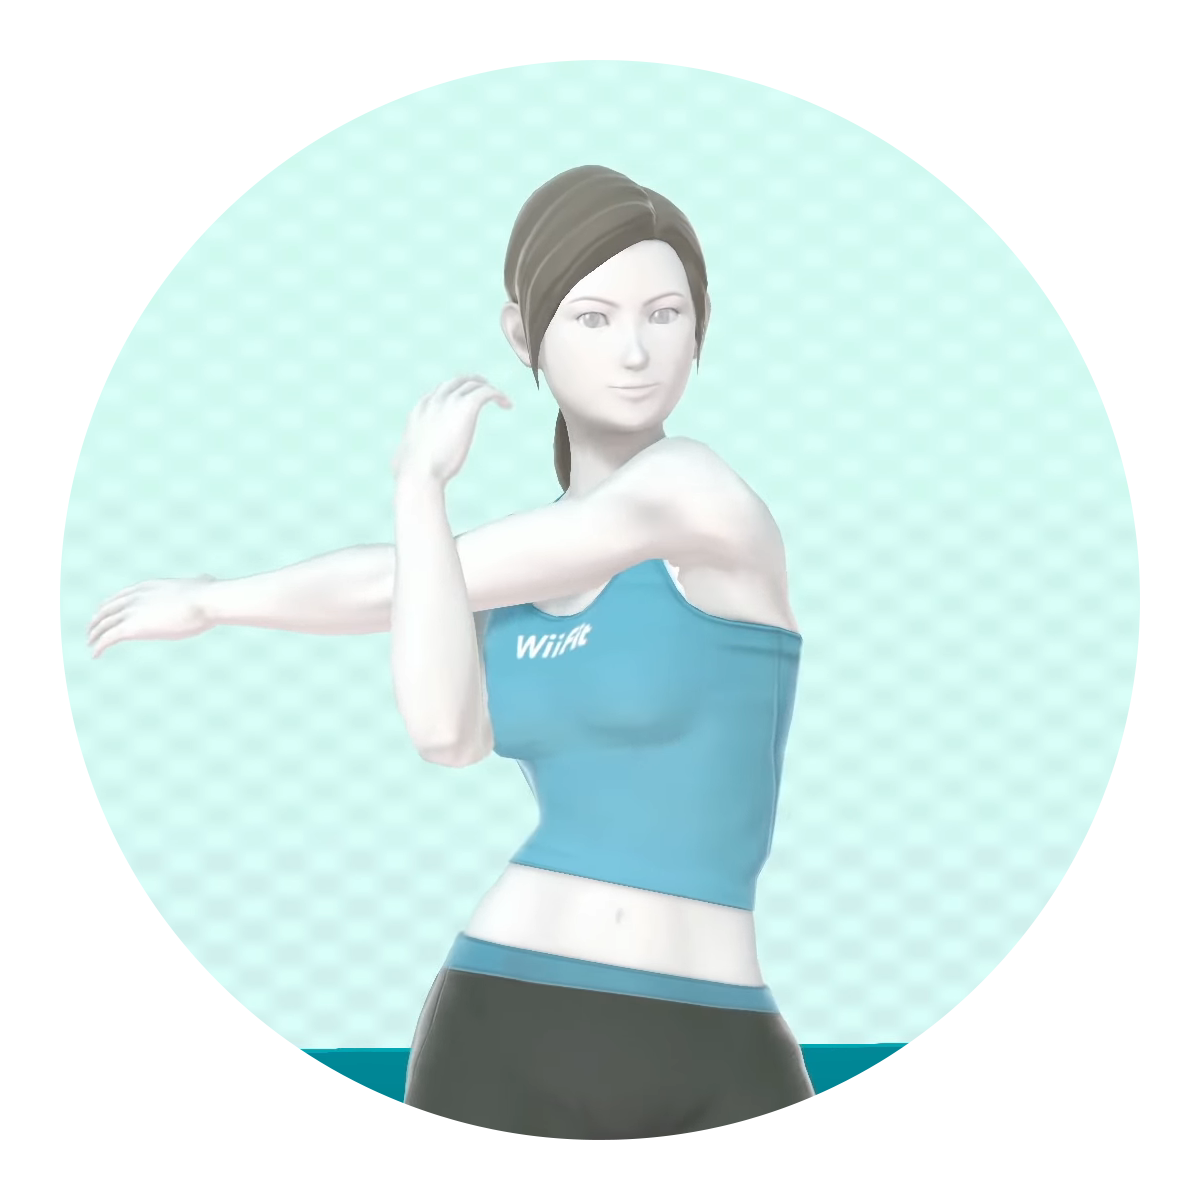 Remembering Wii Fit. The pandemic has created a dearth of… | by Shawn Laib  | SUPERJUMP